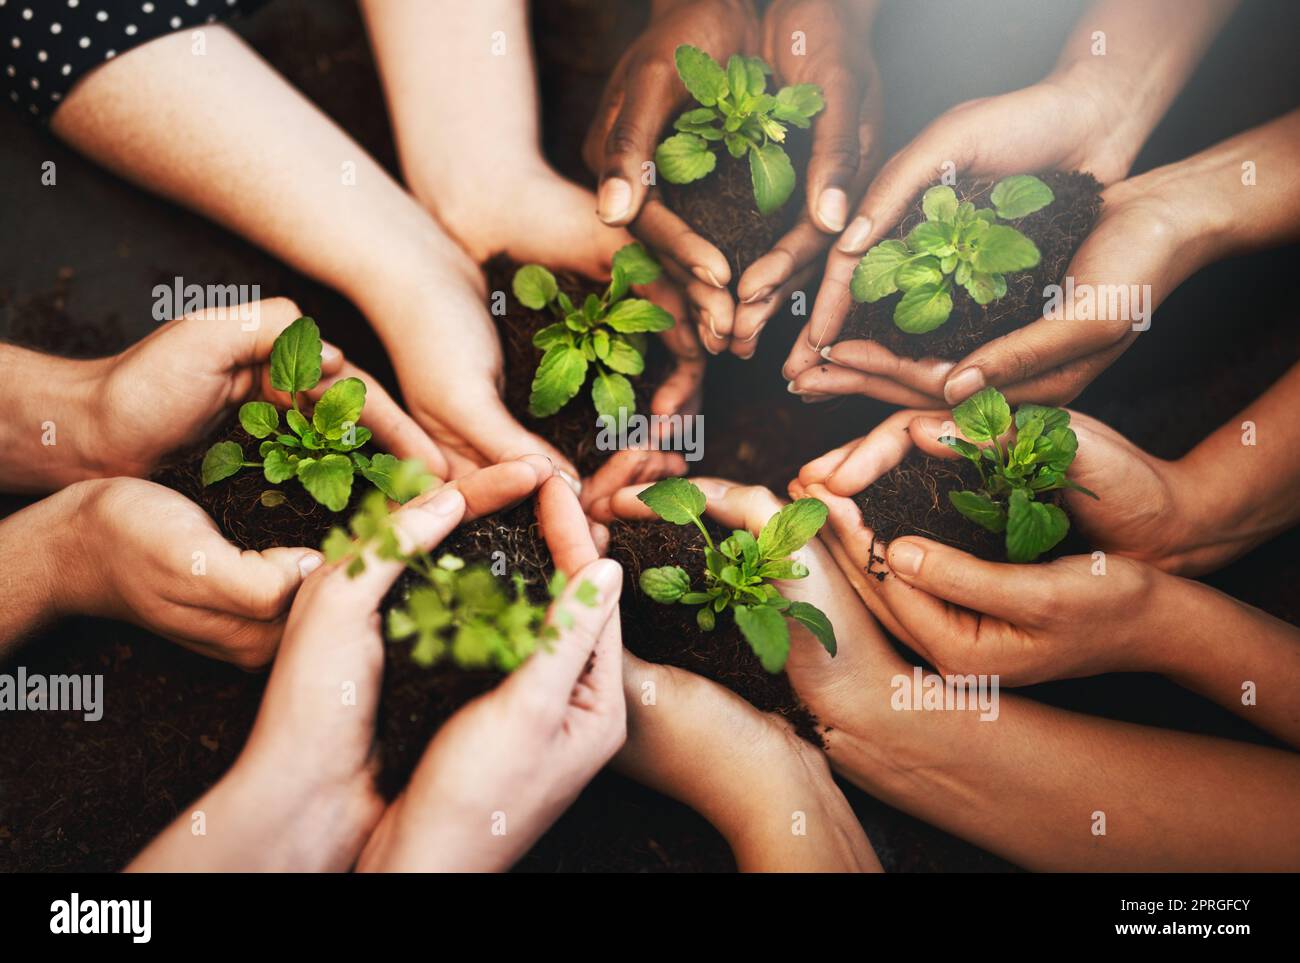 Were all responsible for how we treat the world. a group of people holding plants growing out of soil. Stock Photo